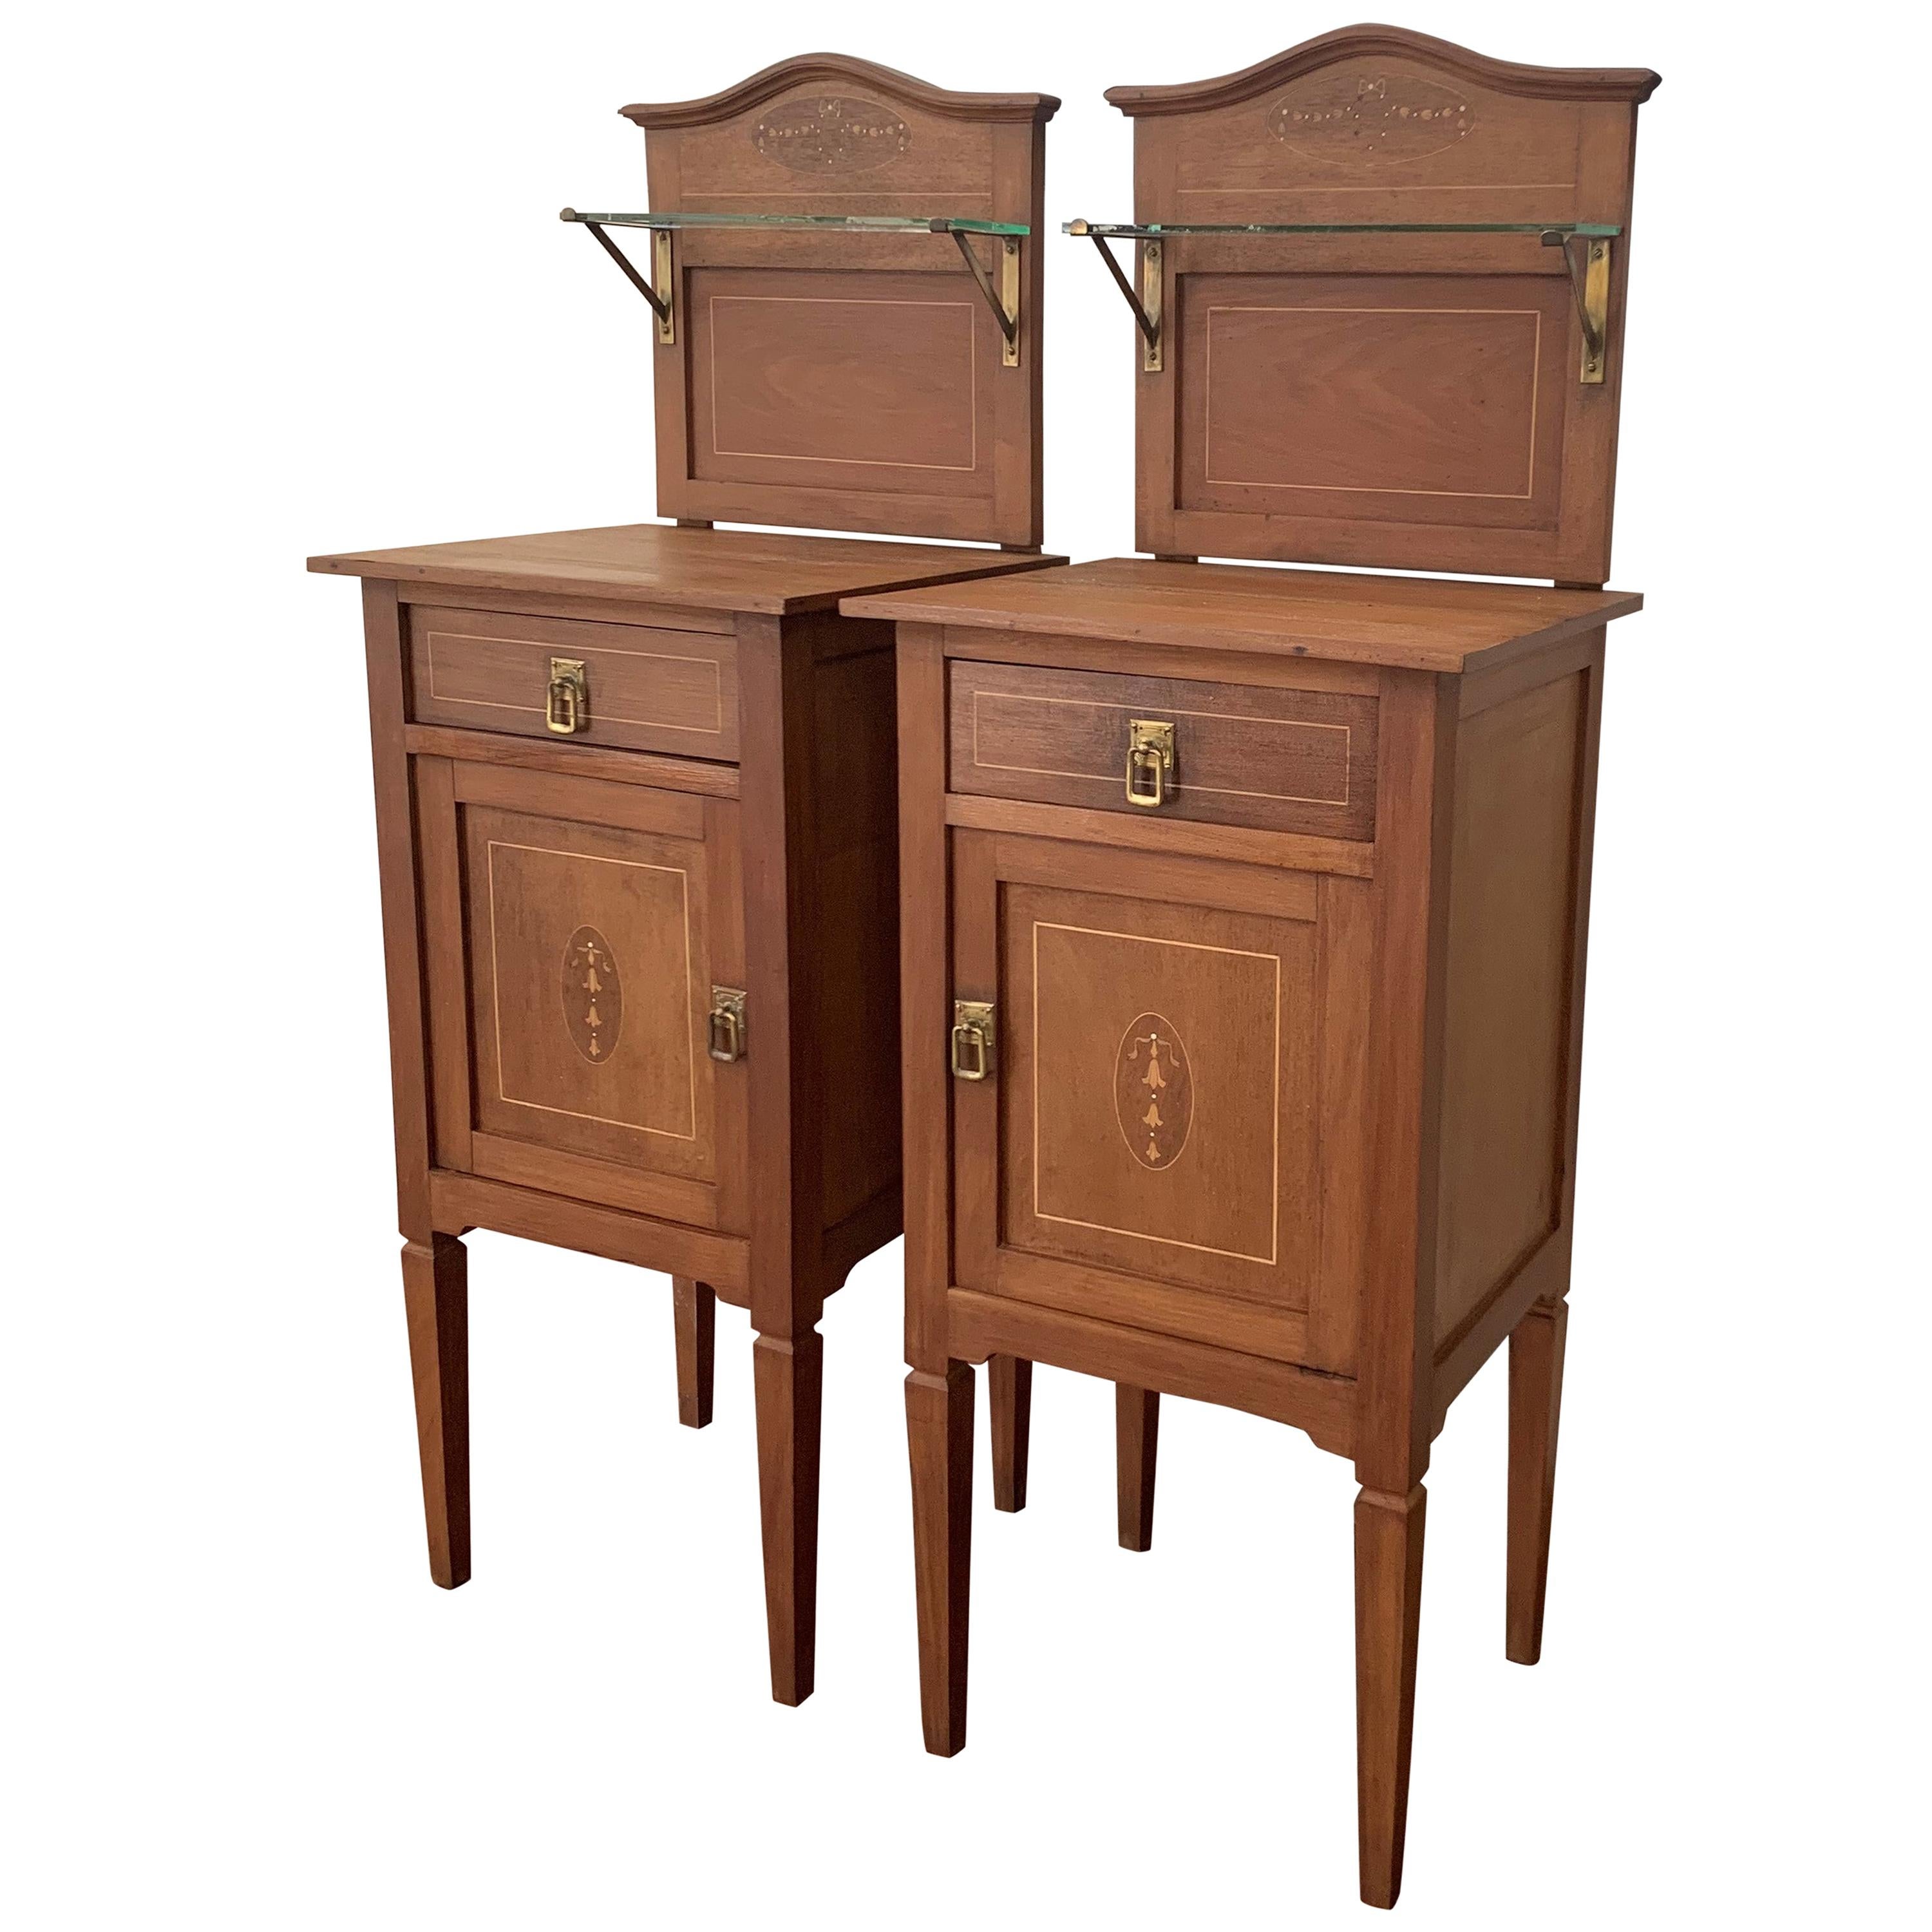 1900s, Art Nouveau Pair of Walnut Nightstands with Crest and Glass Shelve